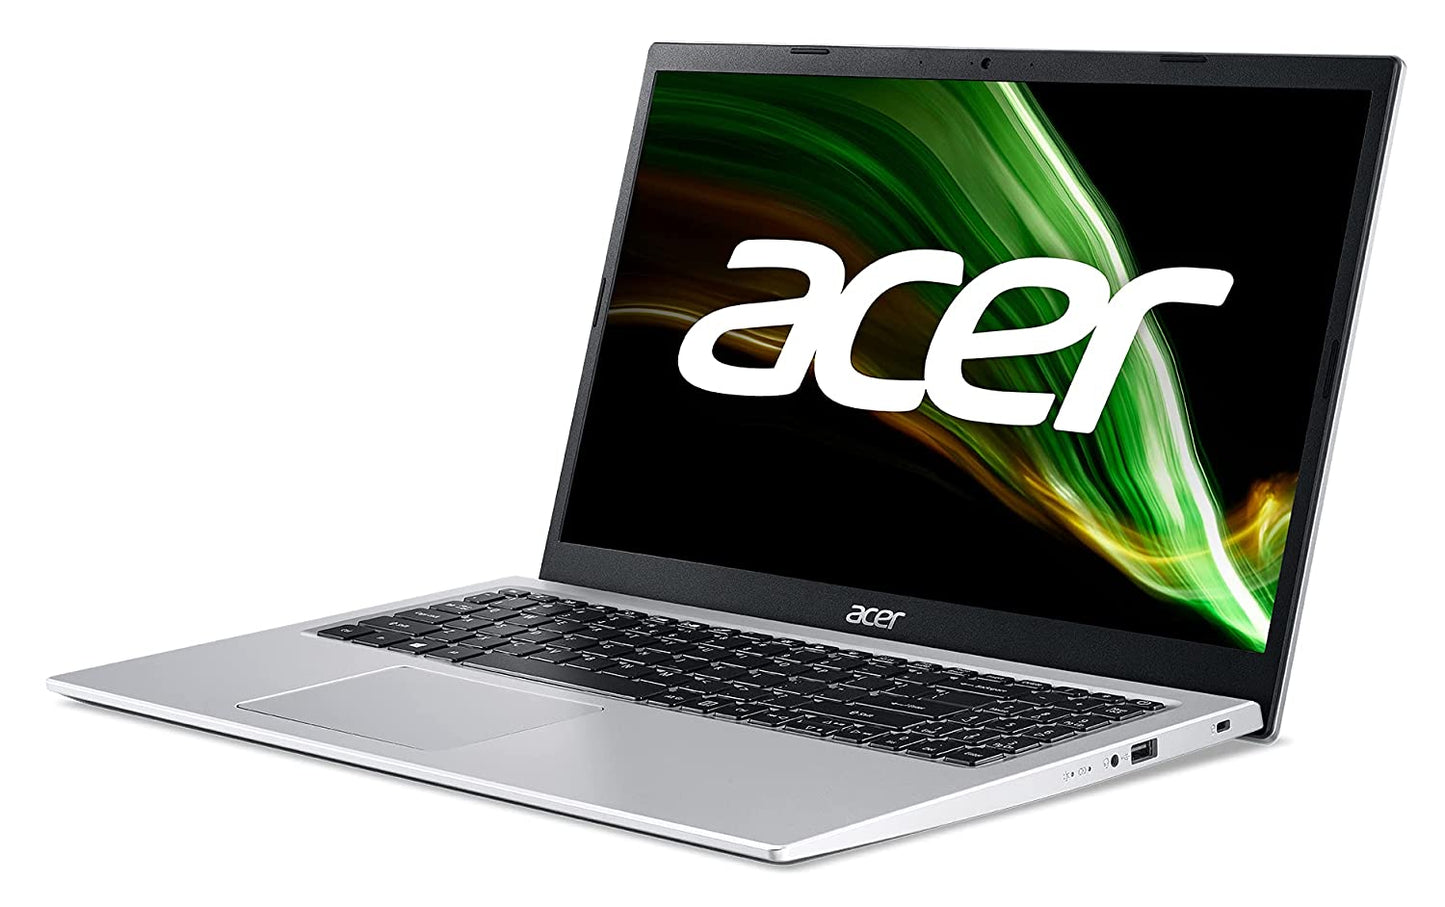 NX.ADDSI.010-Acer Aspire 3 Intel Core i3 11th Gen- (8 GB/512 GB SSD/Windows 11 Home/MS Office/1KG.20GM/Silver) A315-58 with 15.6-inch (39.6 cms) Full HD Display Laptop